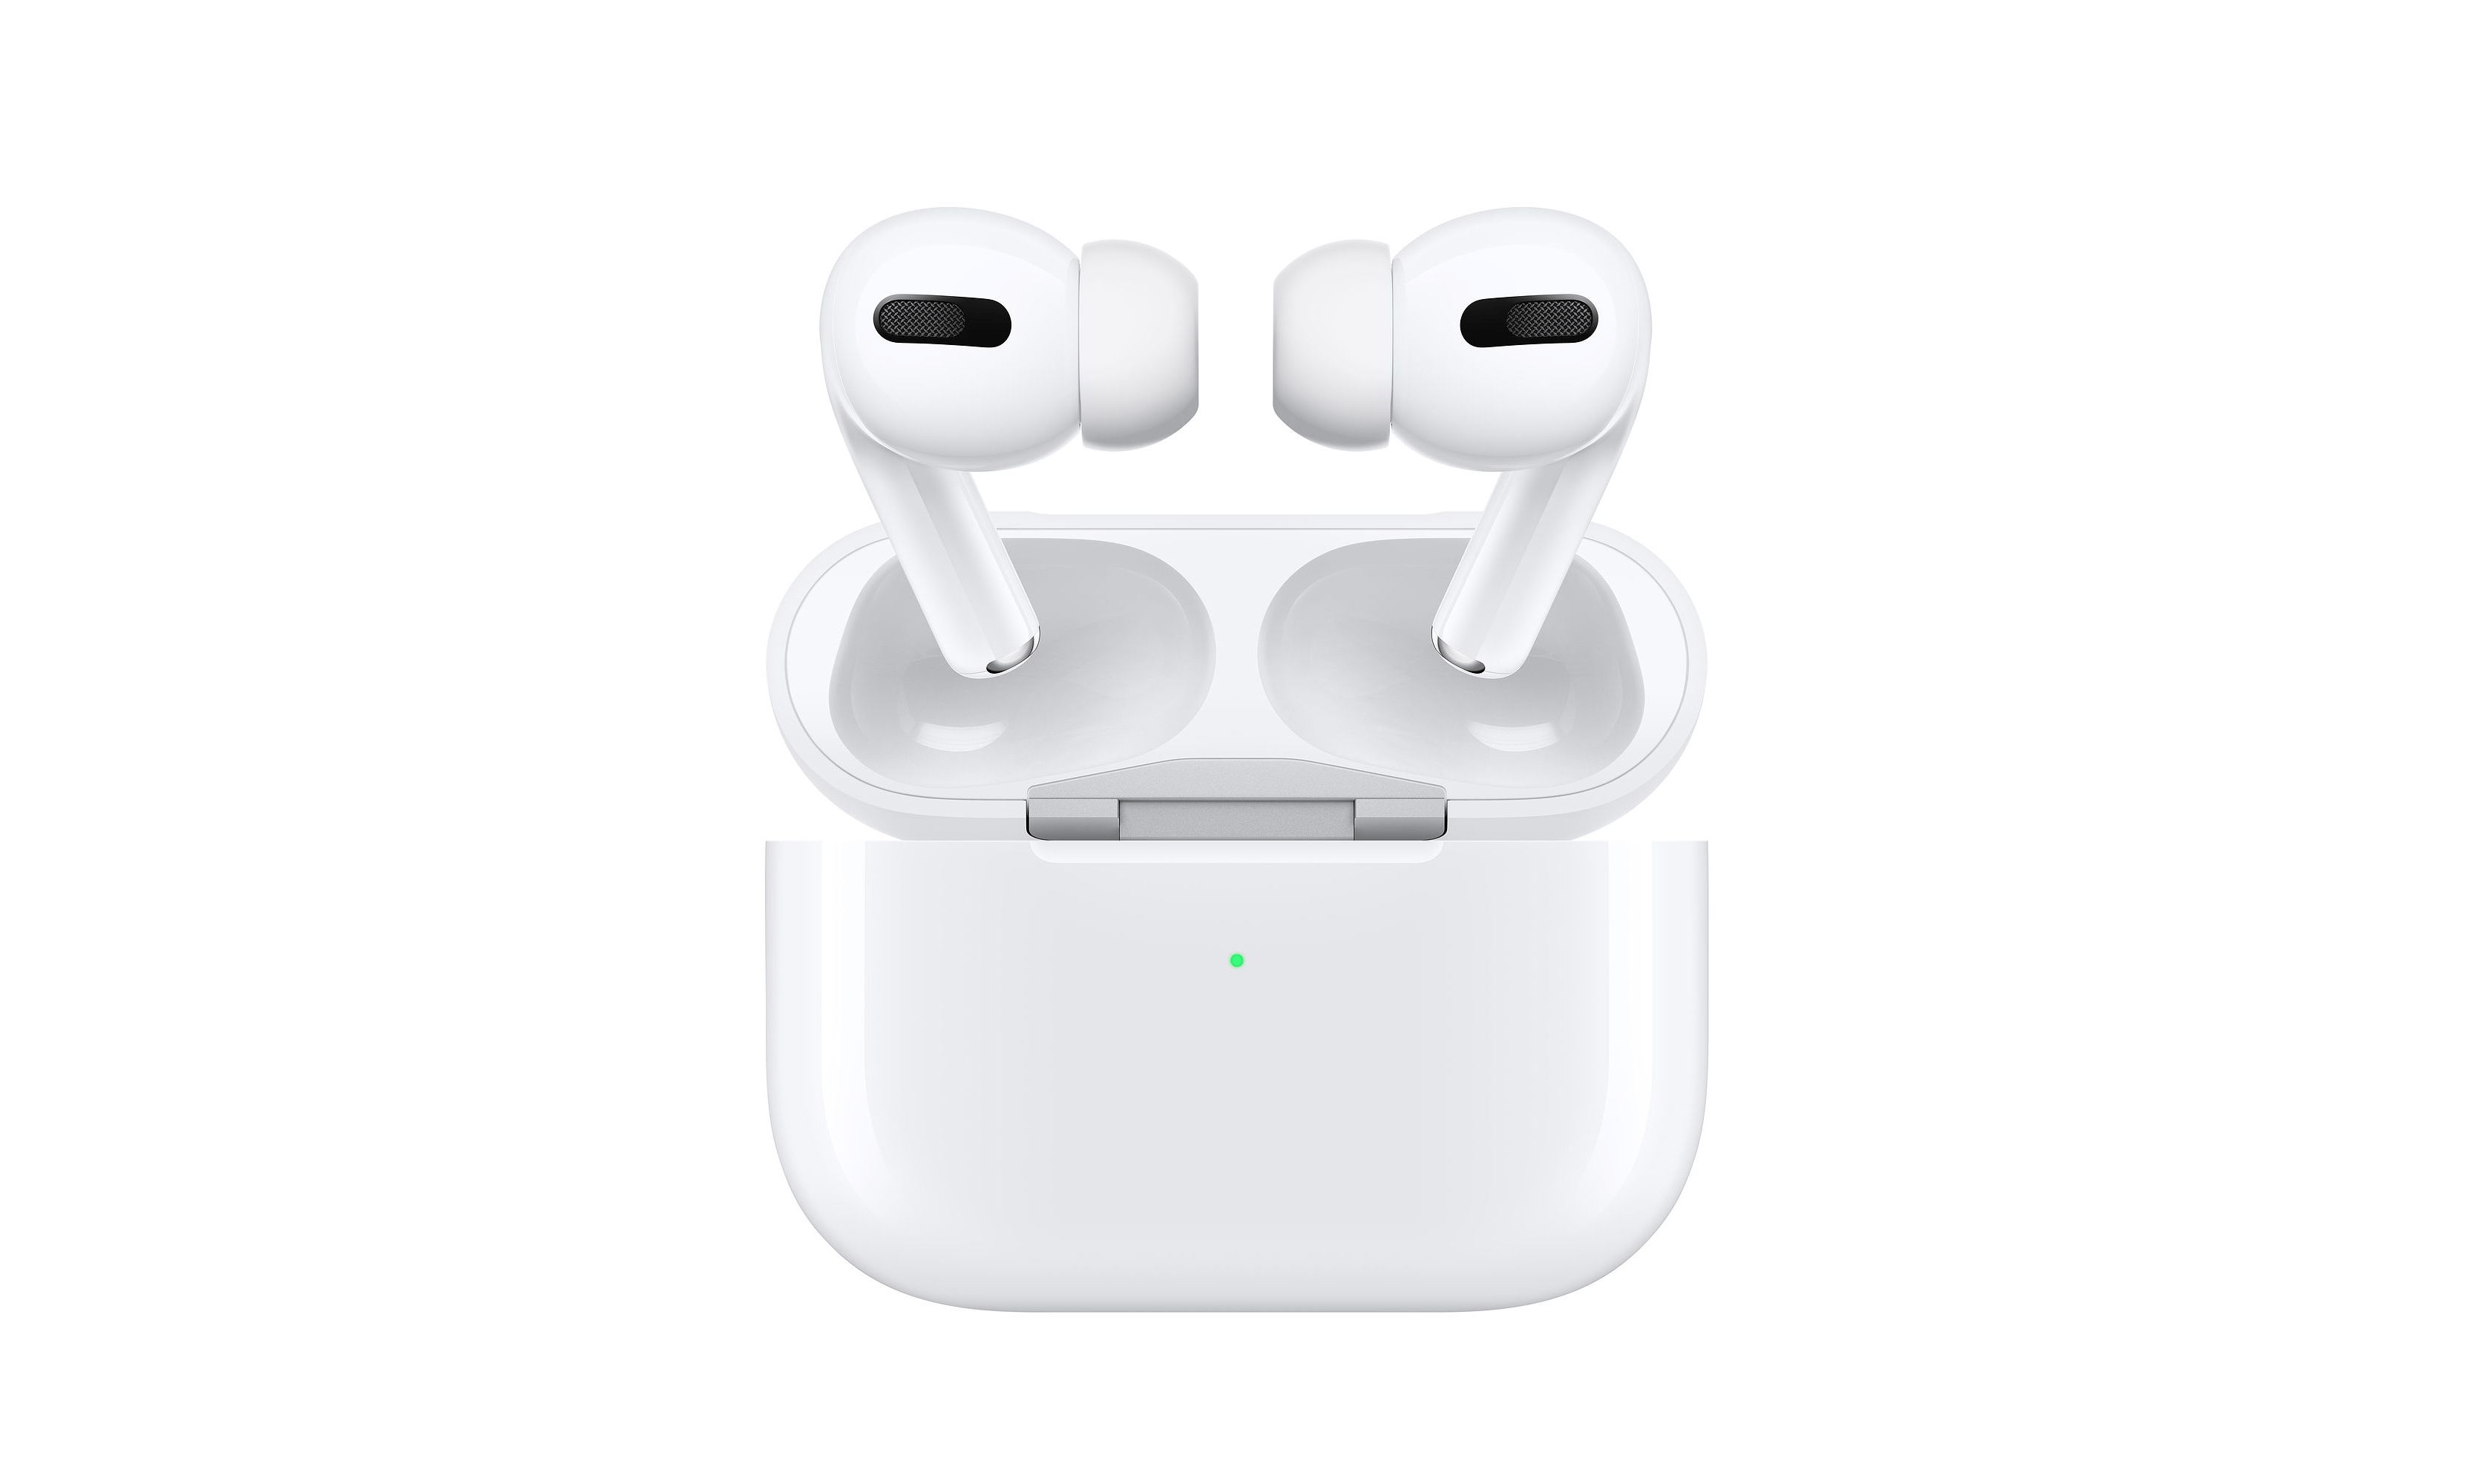 Airpods Pro 2 Preview: release in early 2021, upgrade health monitoring functions